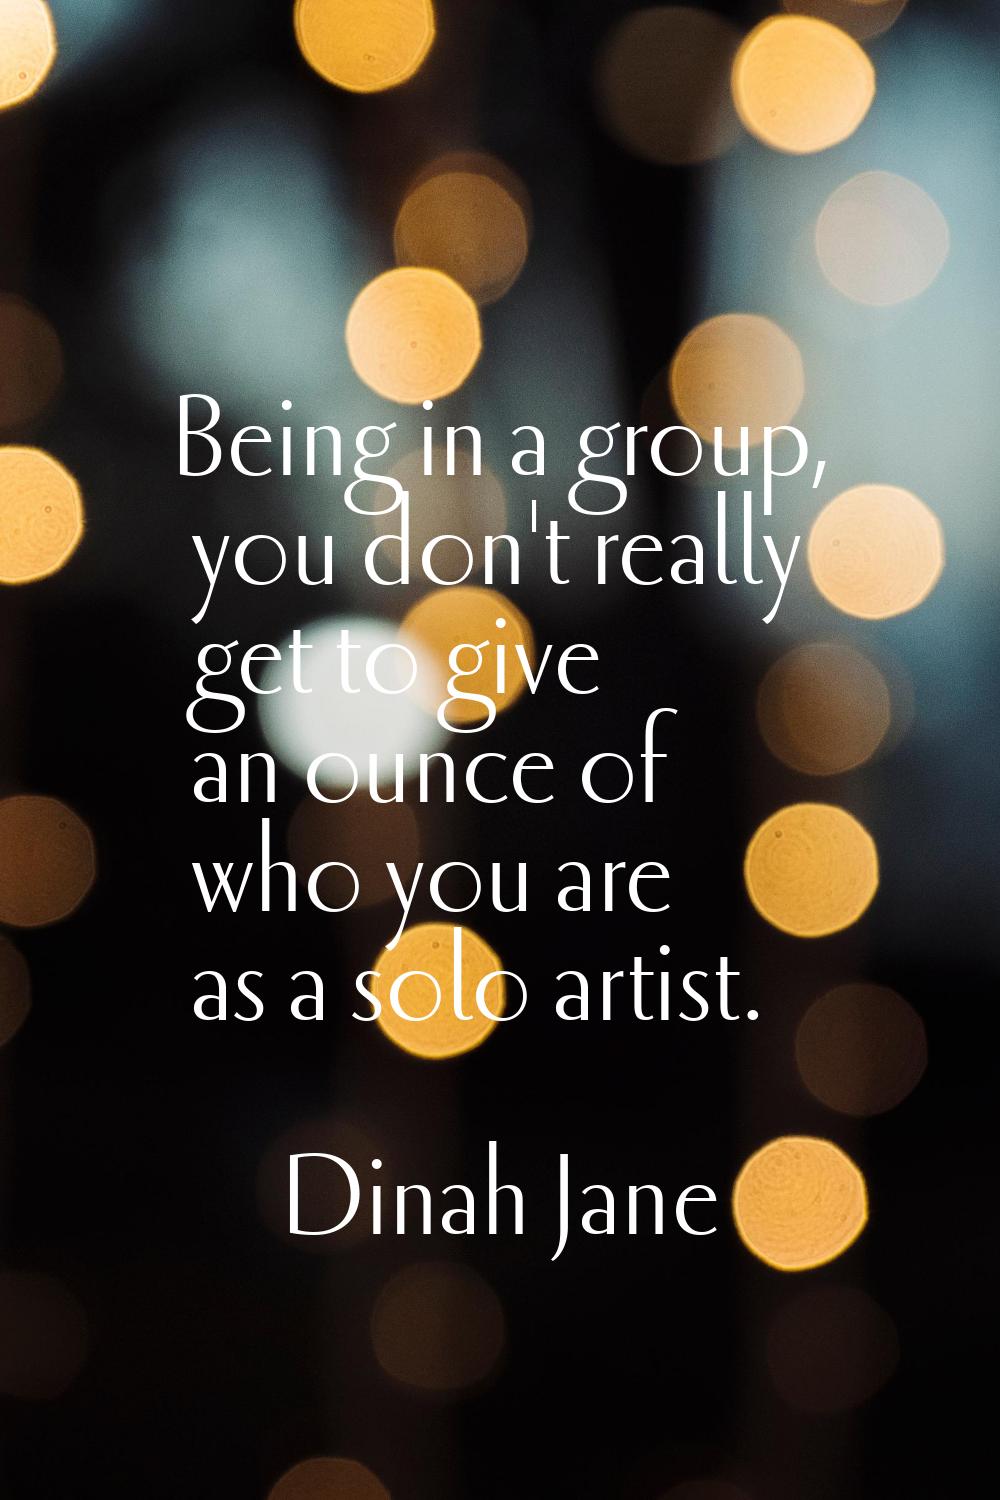 Being in a group, you don't really get to give an ounce of who you are as a solo artist.